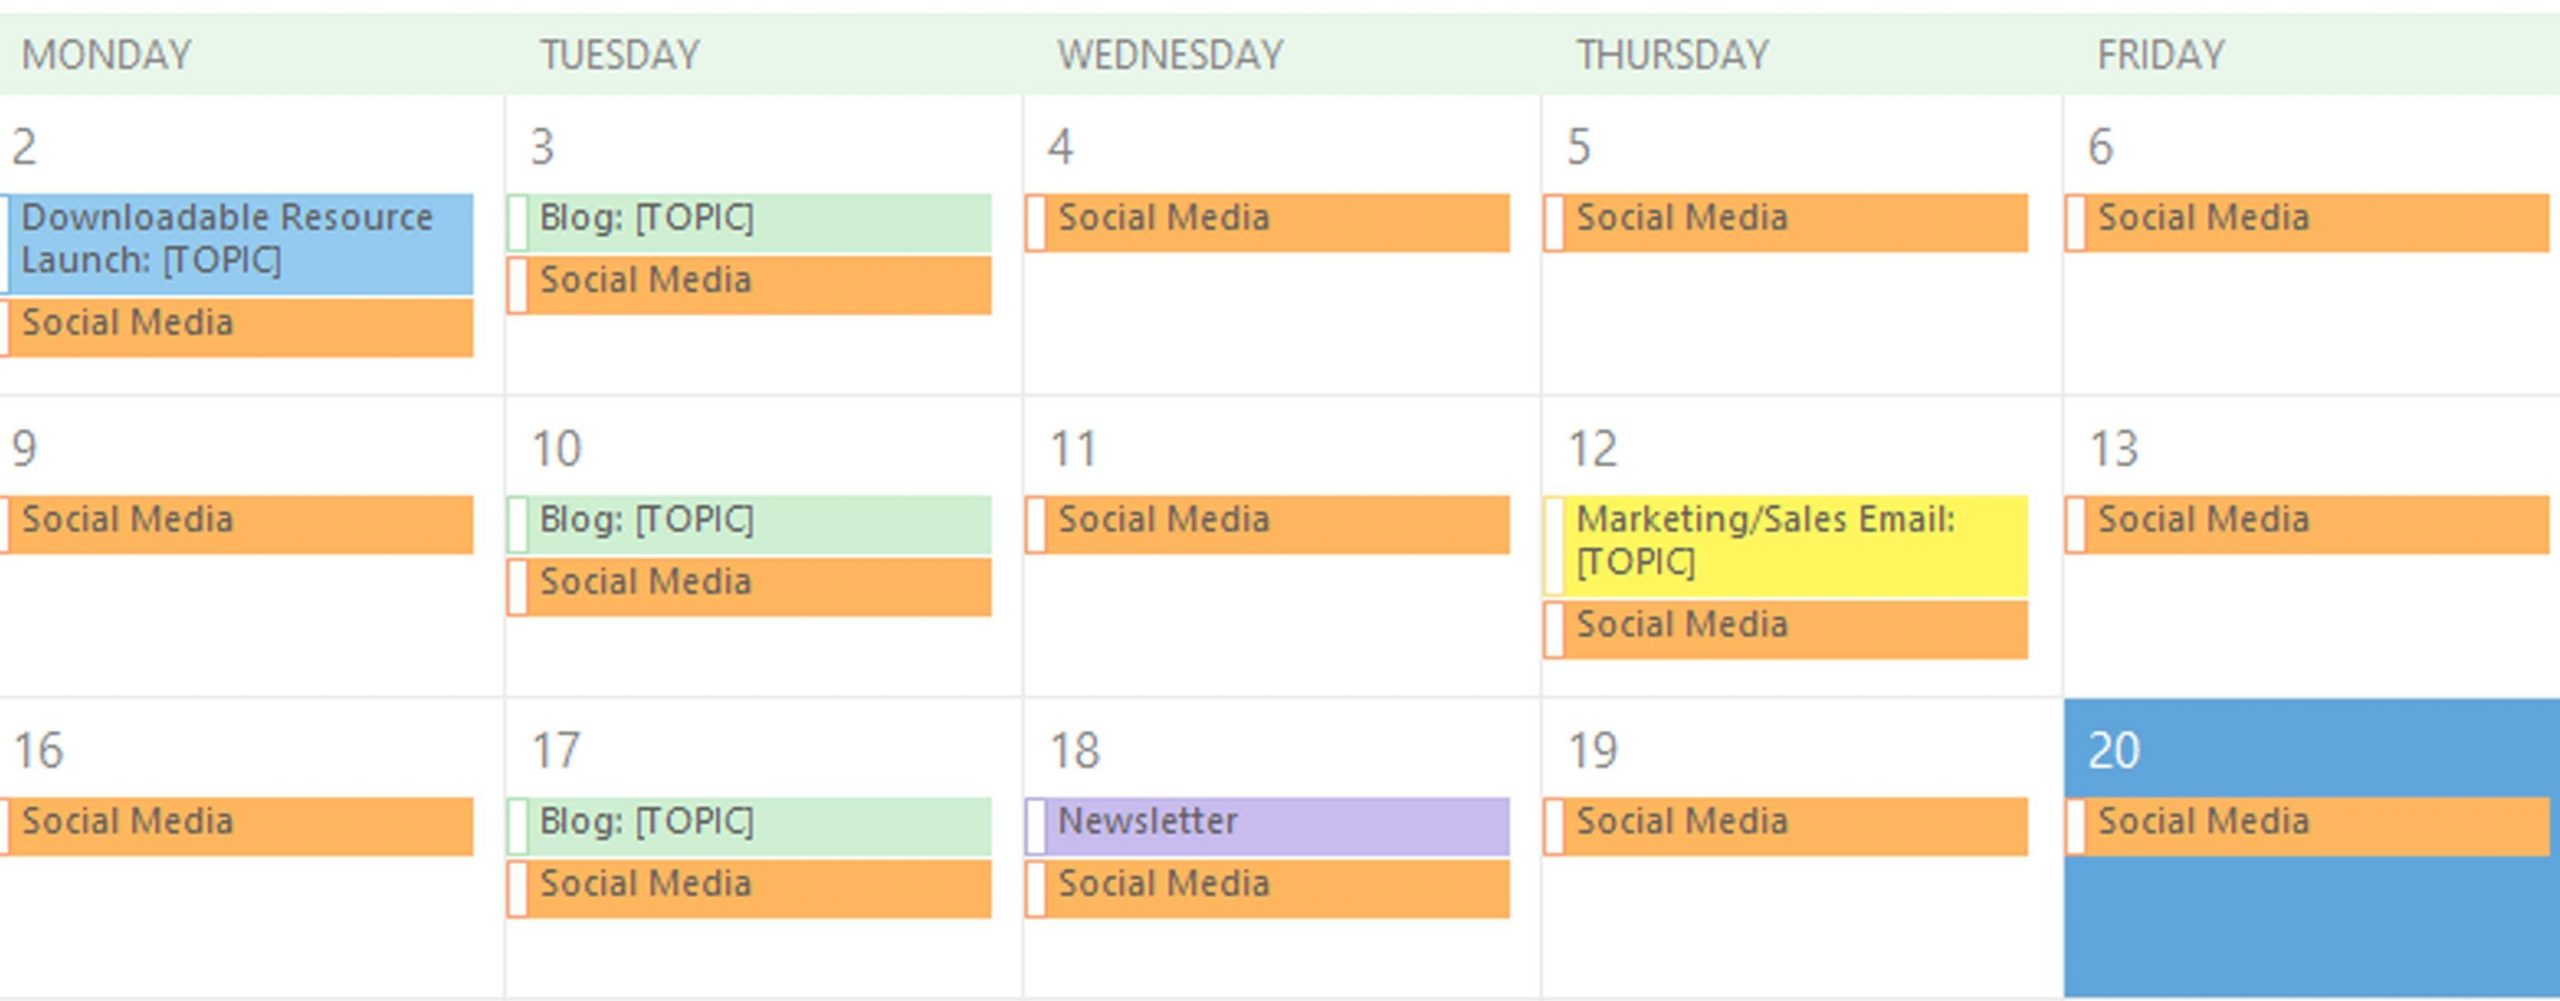 B2B Content Calendar: How To Plan And Track Content | Moresales